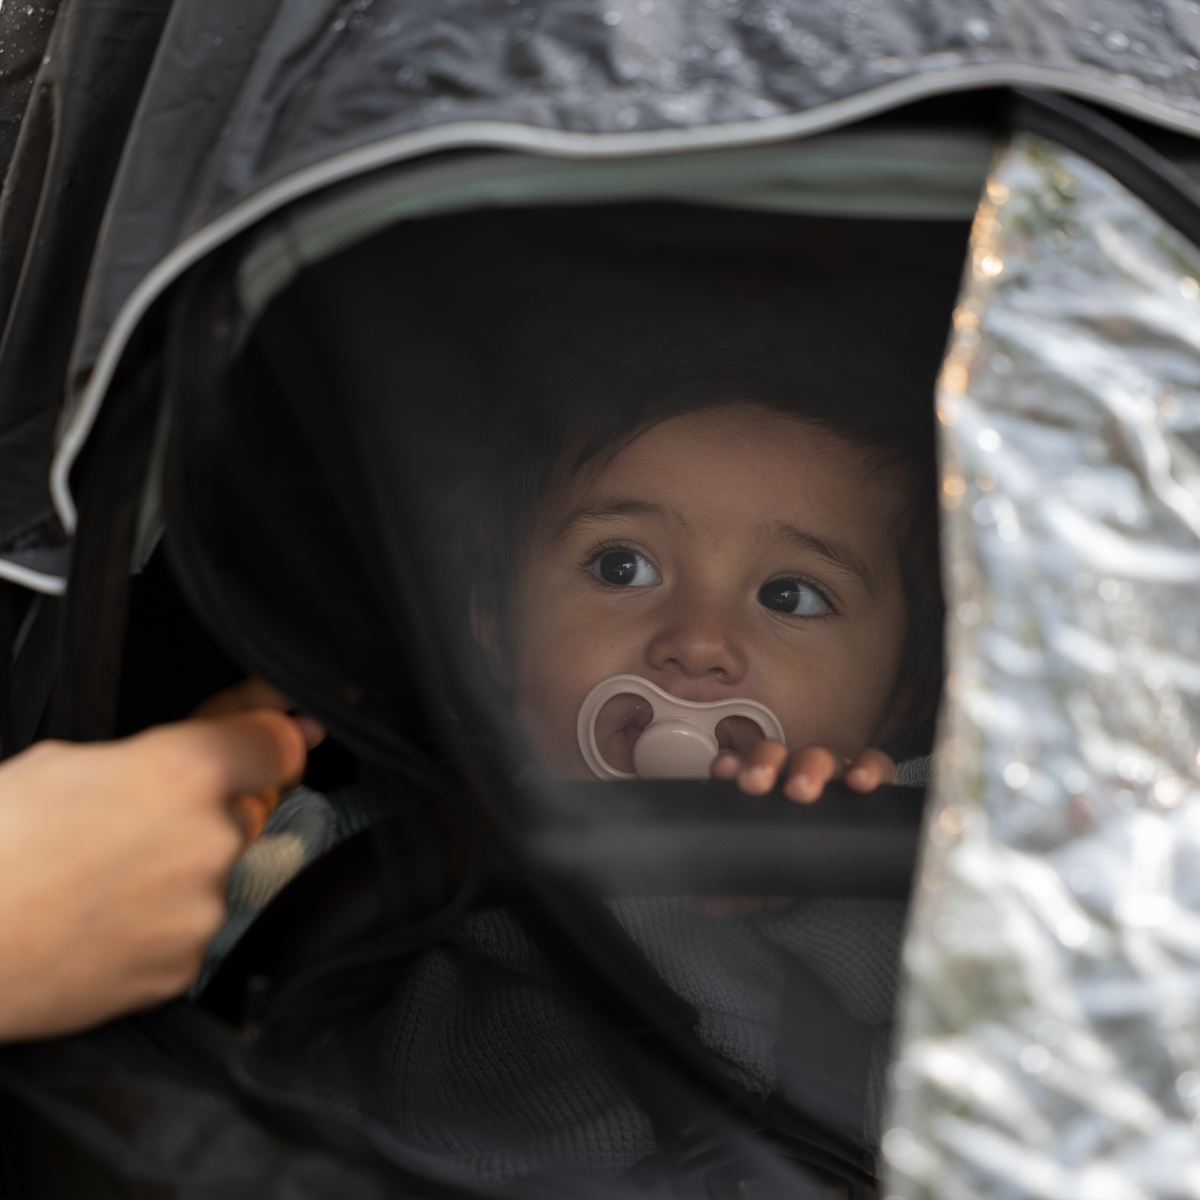 A close-up of a baby inside a black Thule Shine stroller with a Thule Shine All-weather Cover.